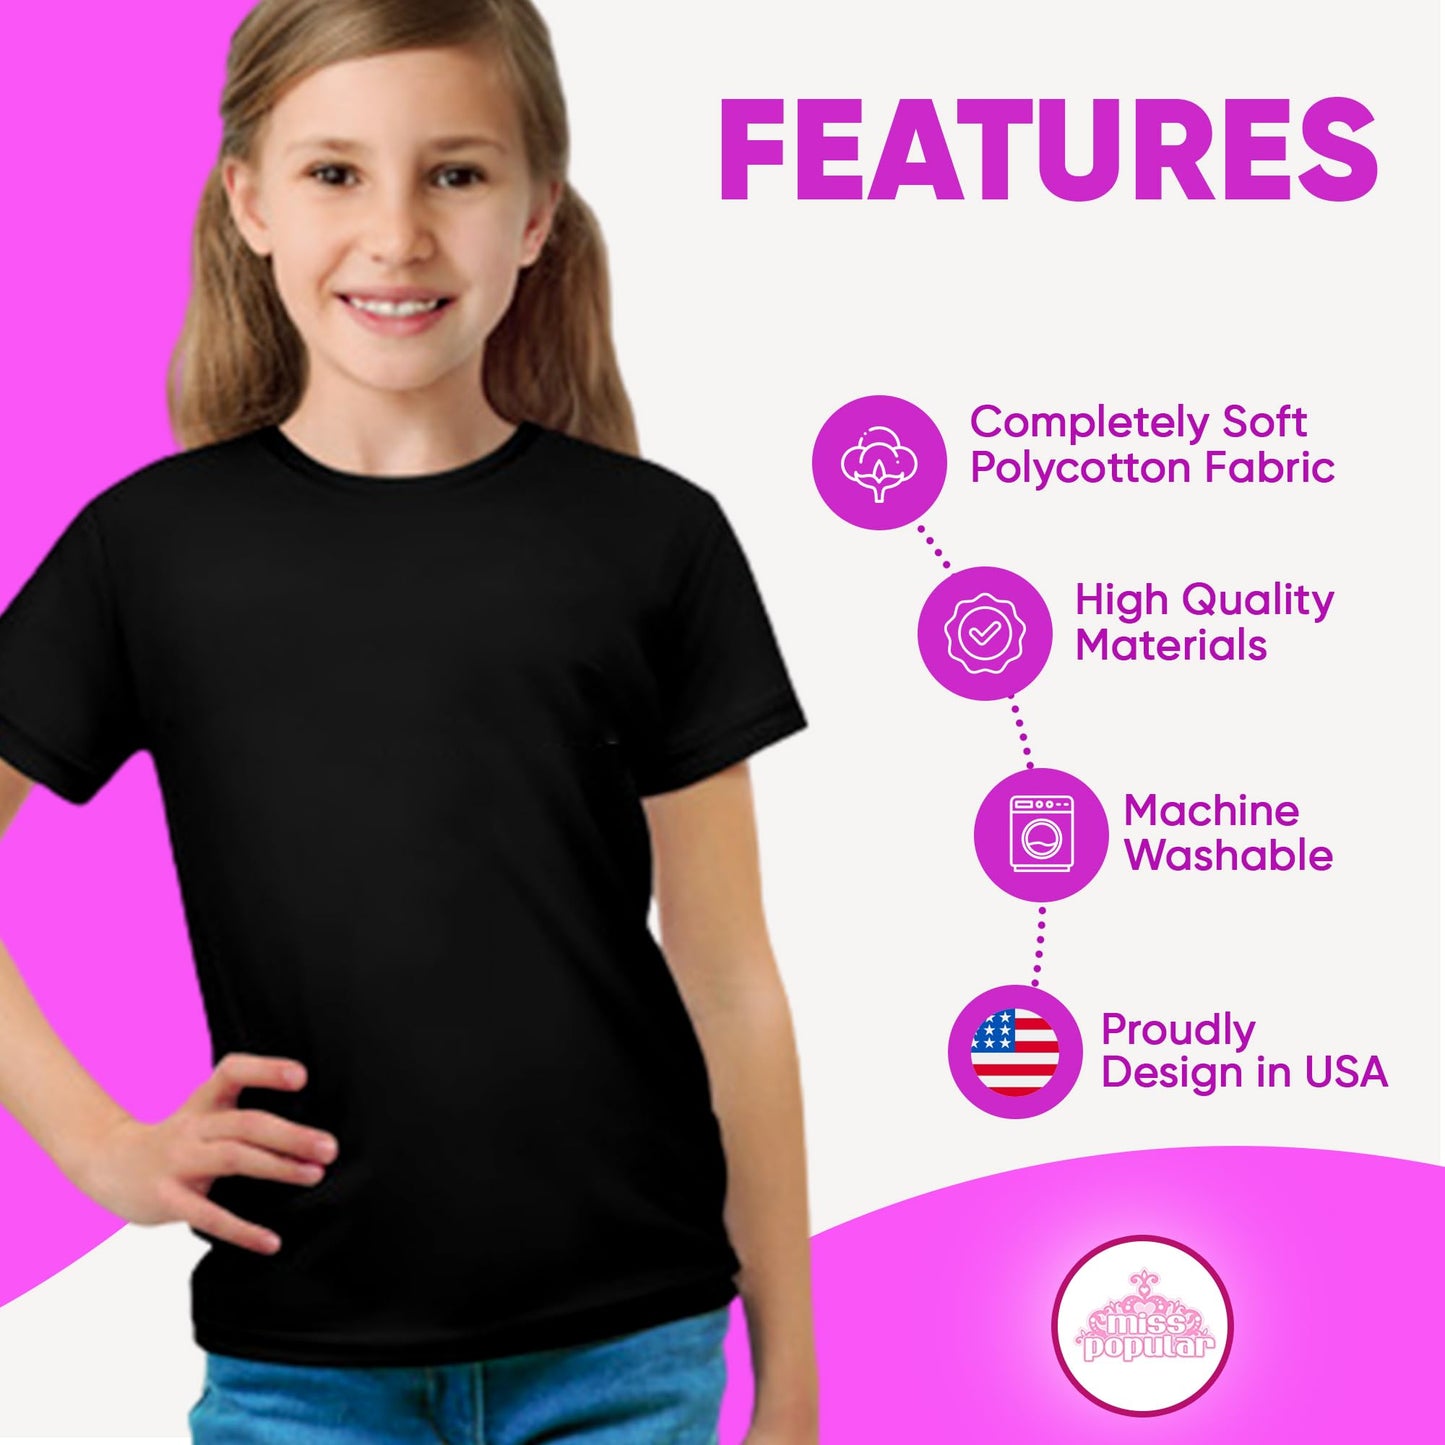 MISS POPULAR Girls' 8-Pack Super Soft Polycotton Short Sleeve Crew Neck T Shirts, Assorted Color Solid Tees